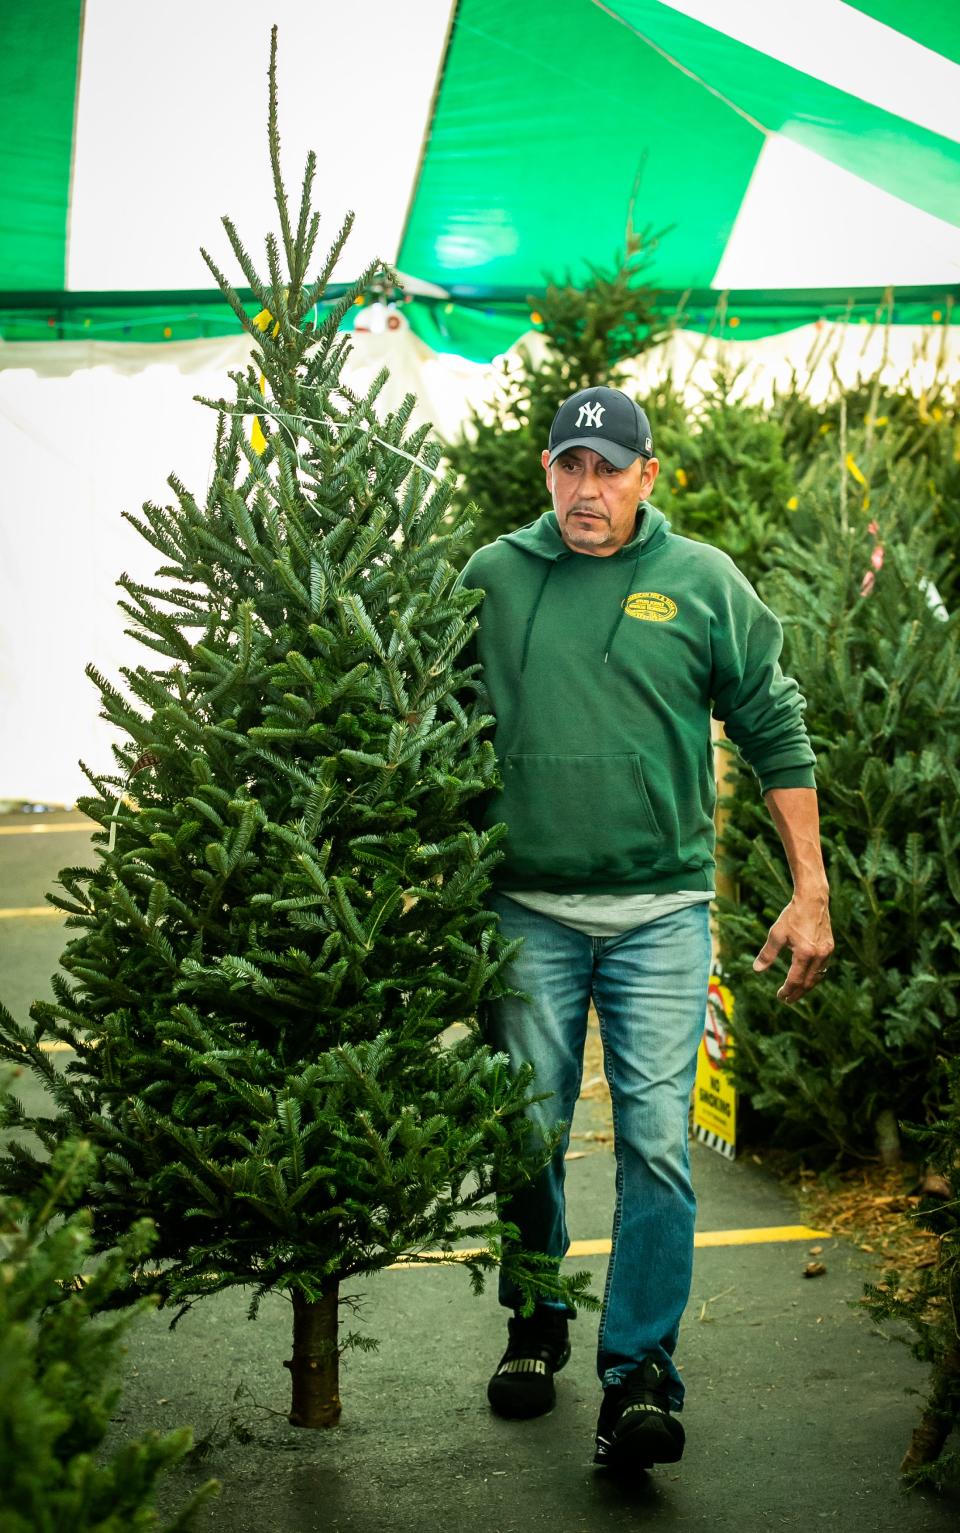 "This is the one," Alex Rucci said after finding the right Christmas tree for his family while shopping on Dec. 1 at Home Depot in Ocala.